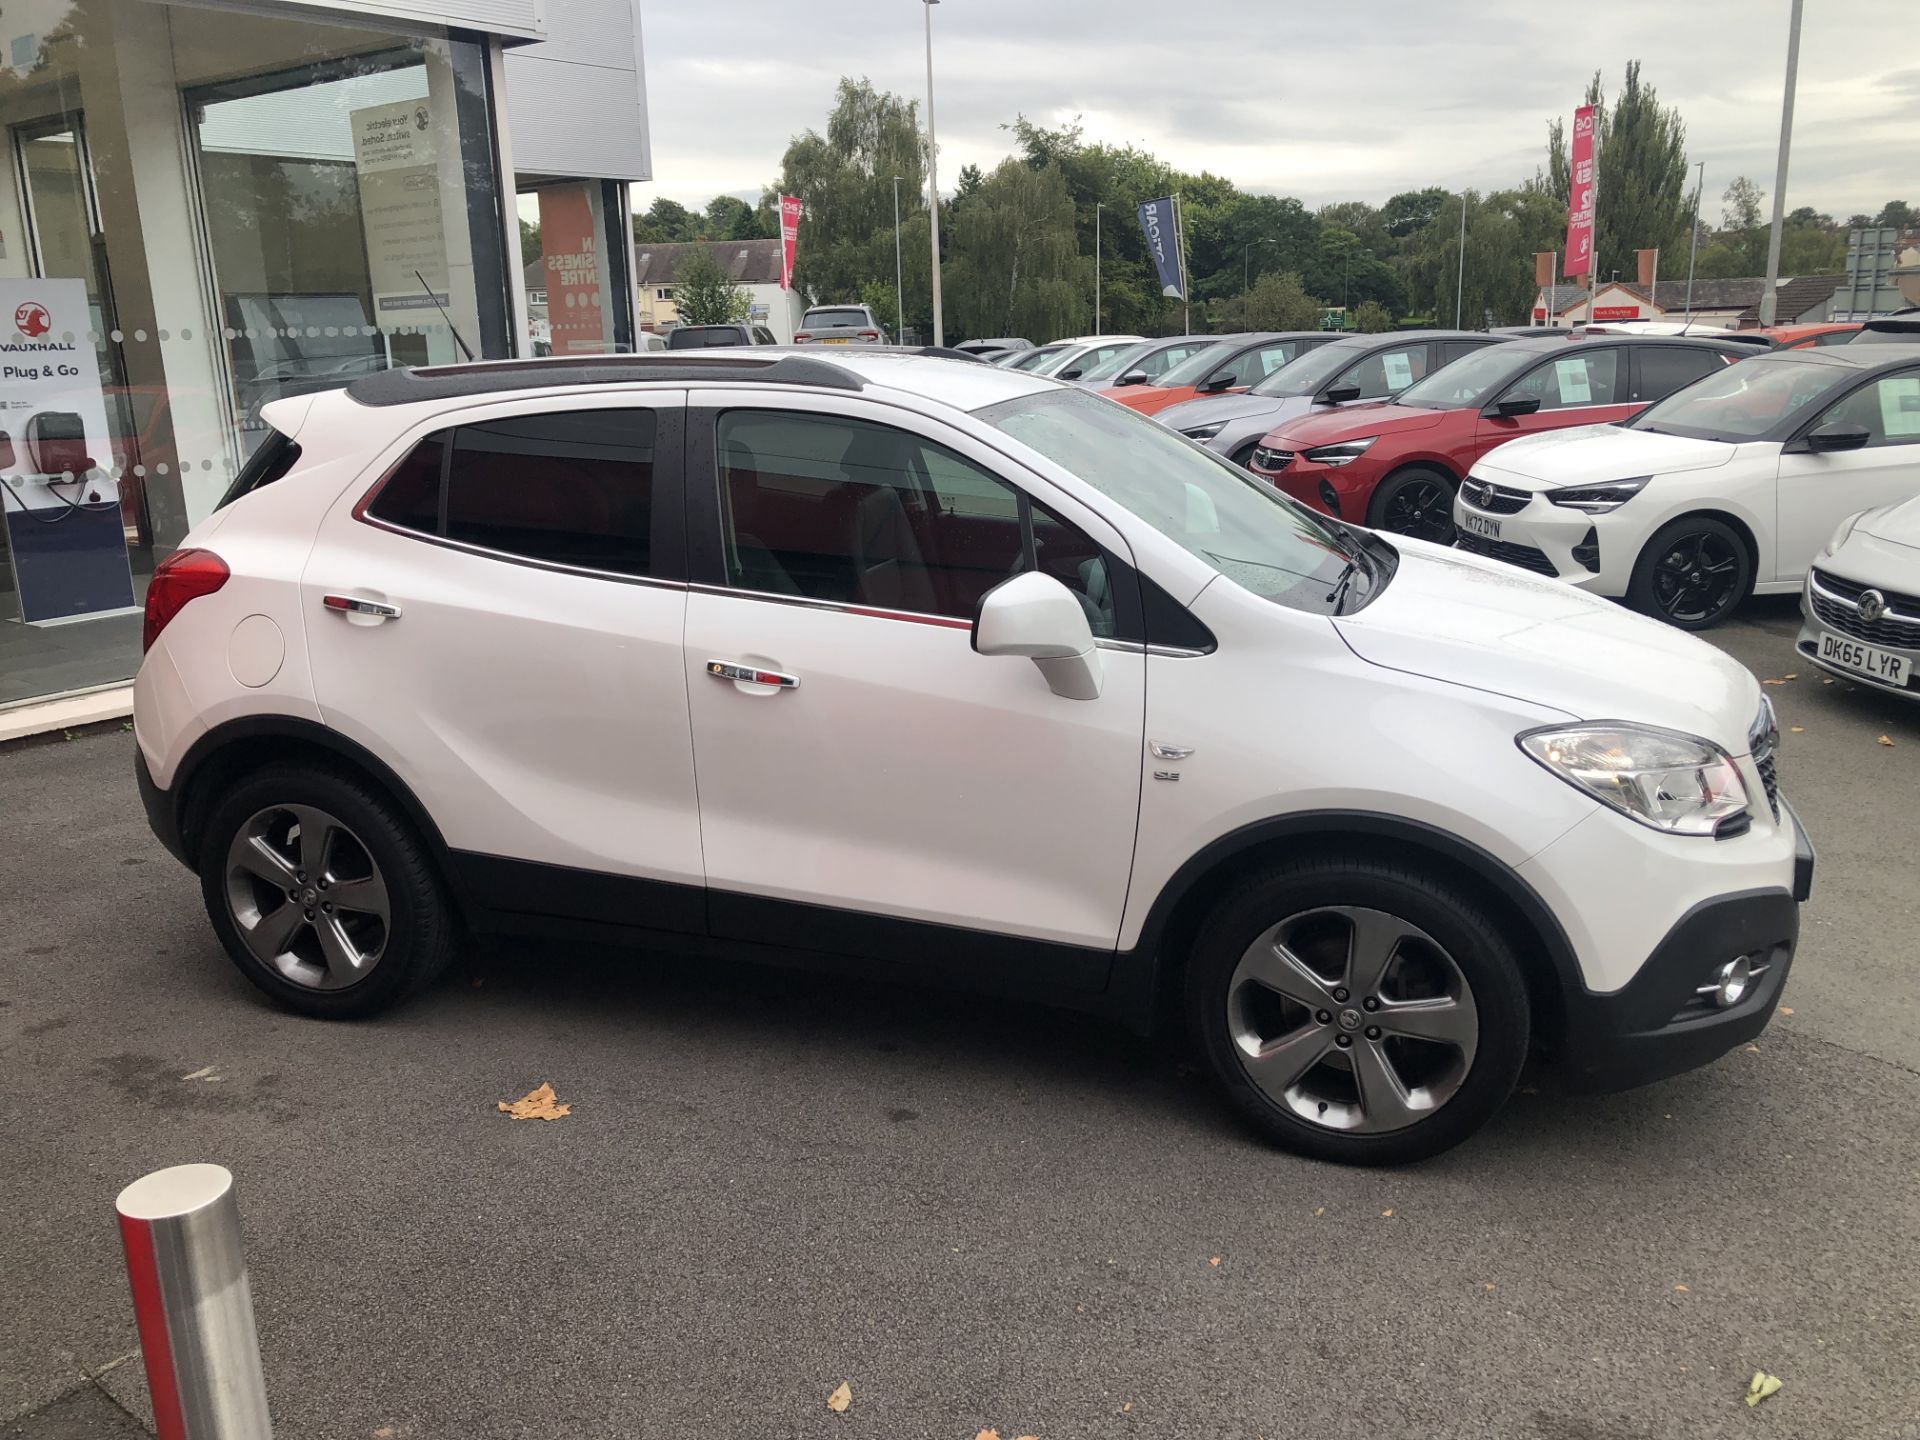 Vauxhall Mokka 1.7 CDTi (130ps) SE 5dr Automatic, Registration: LX63DGU, Date First Registered: 28/ - Image 2 of 7